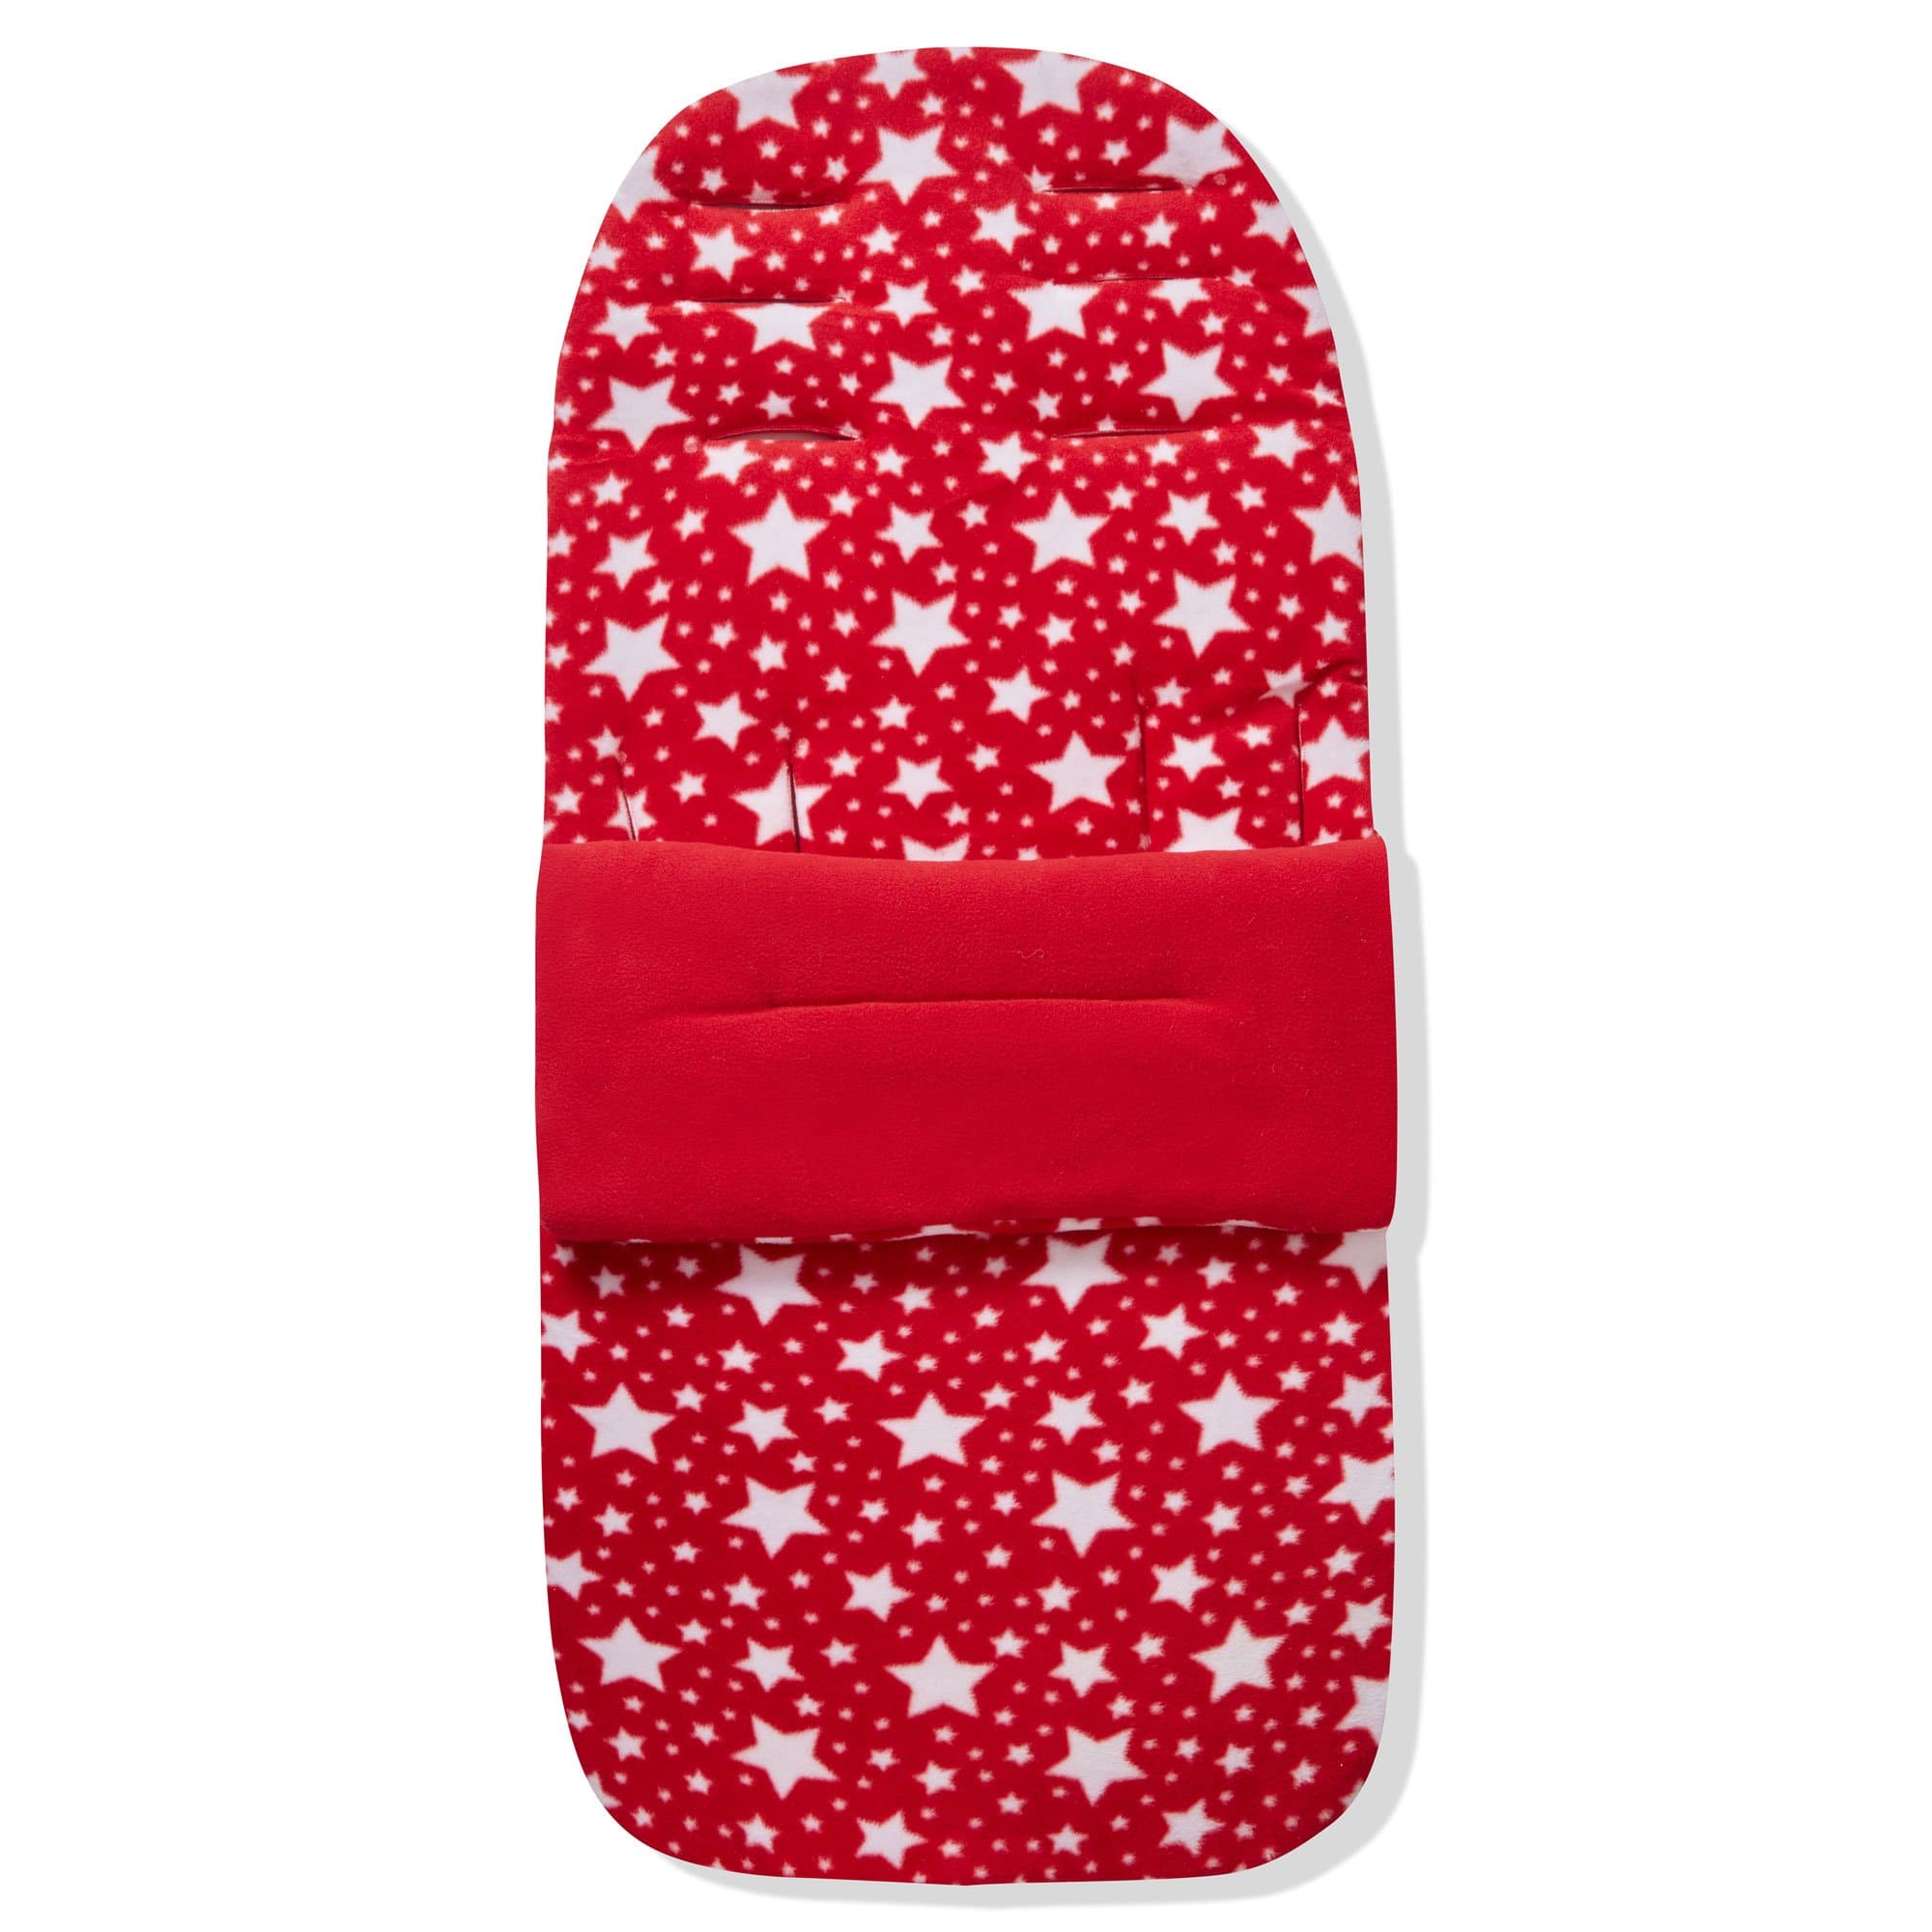 Fleece Footmuff / Cosy Toes Compatible with Hybrid - For Your Little One